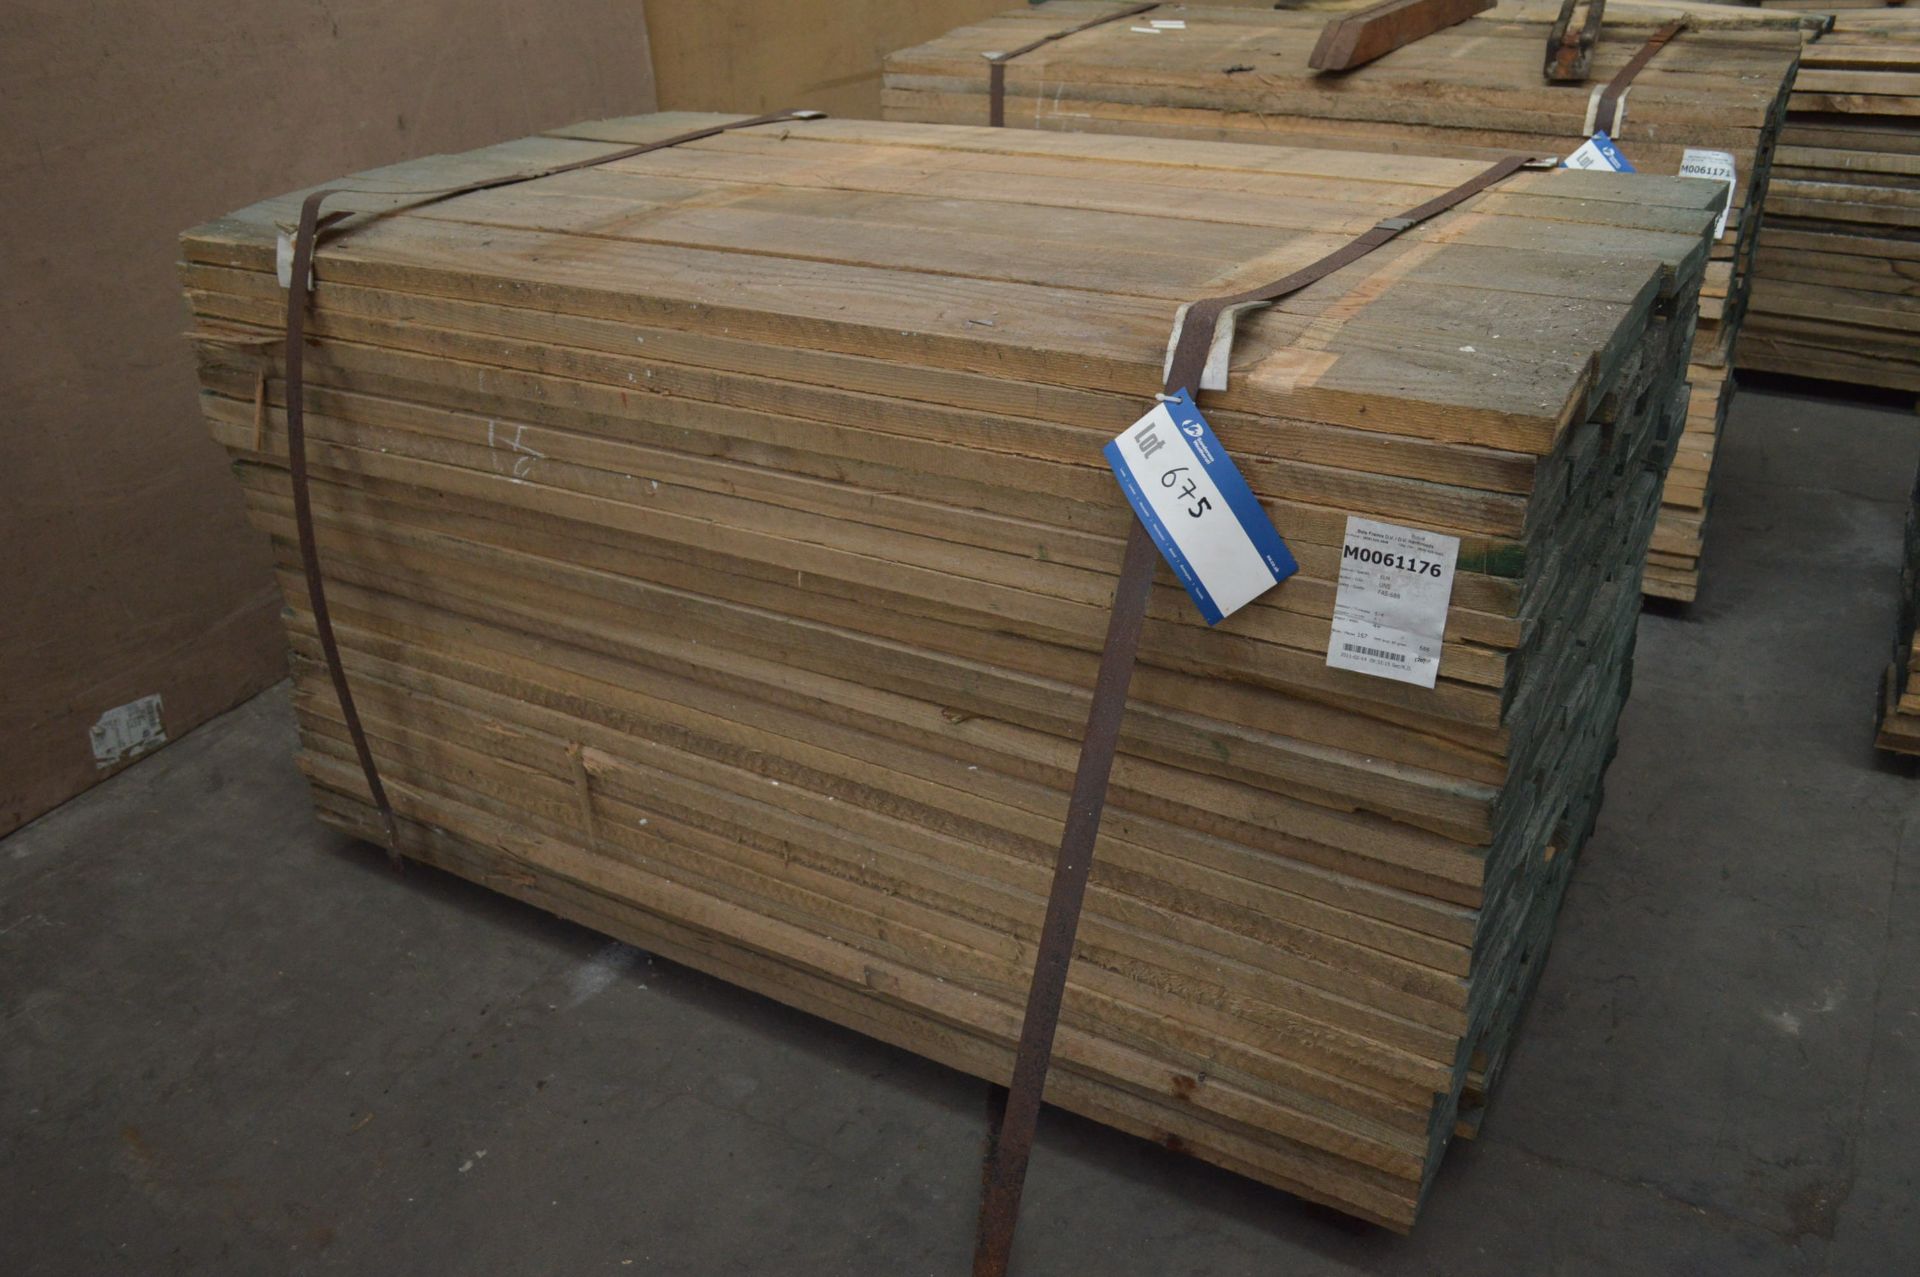 ROUGH SAWN ELM, (in one stack), each length approx. 6ft long